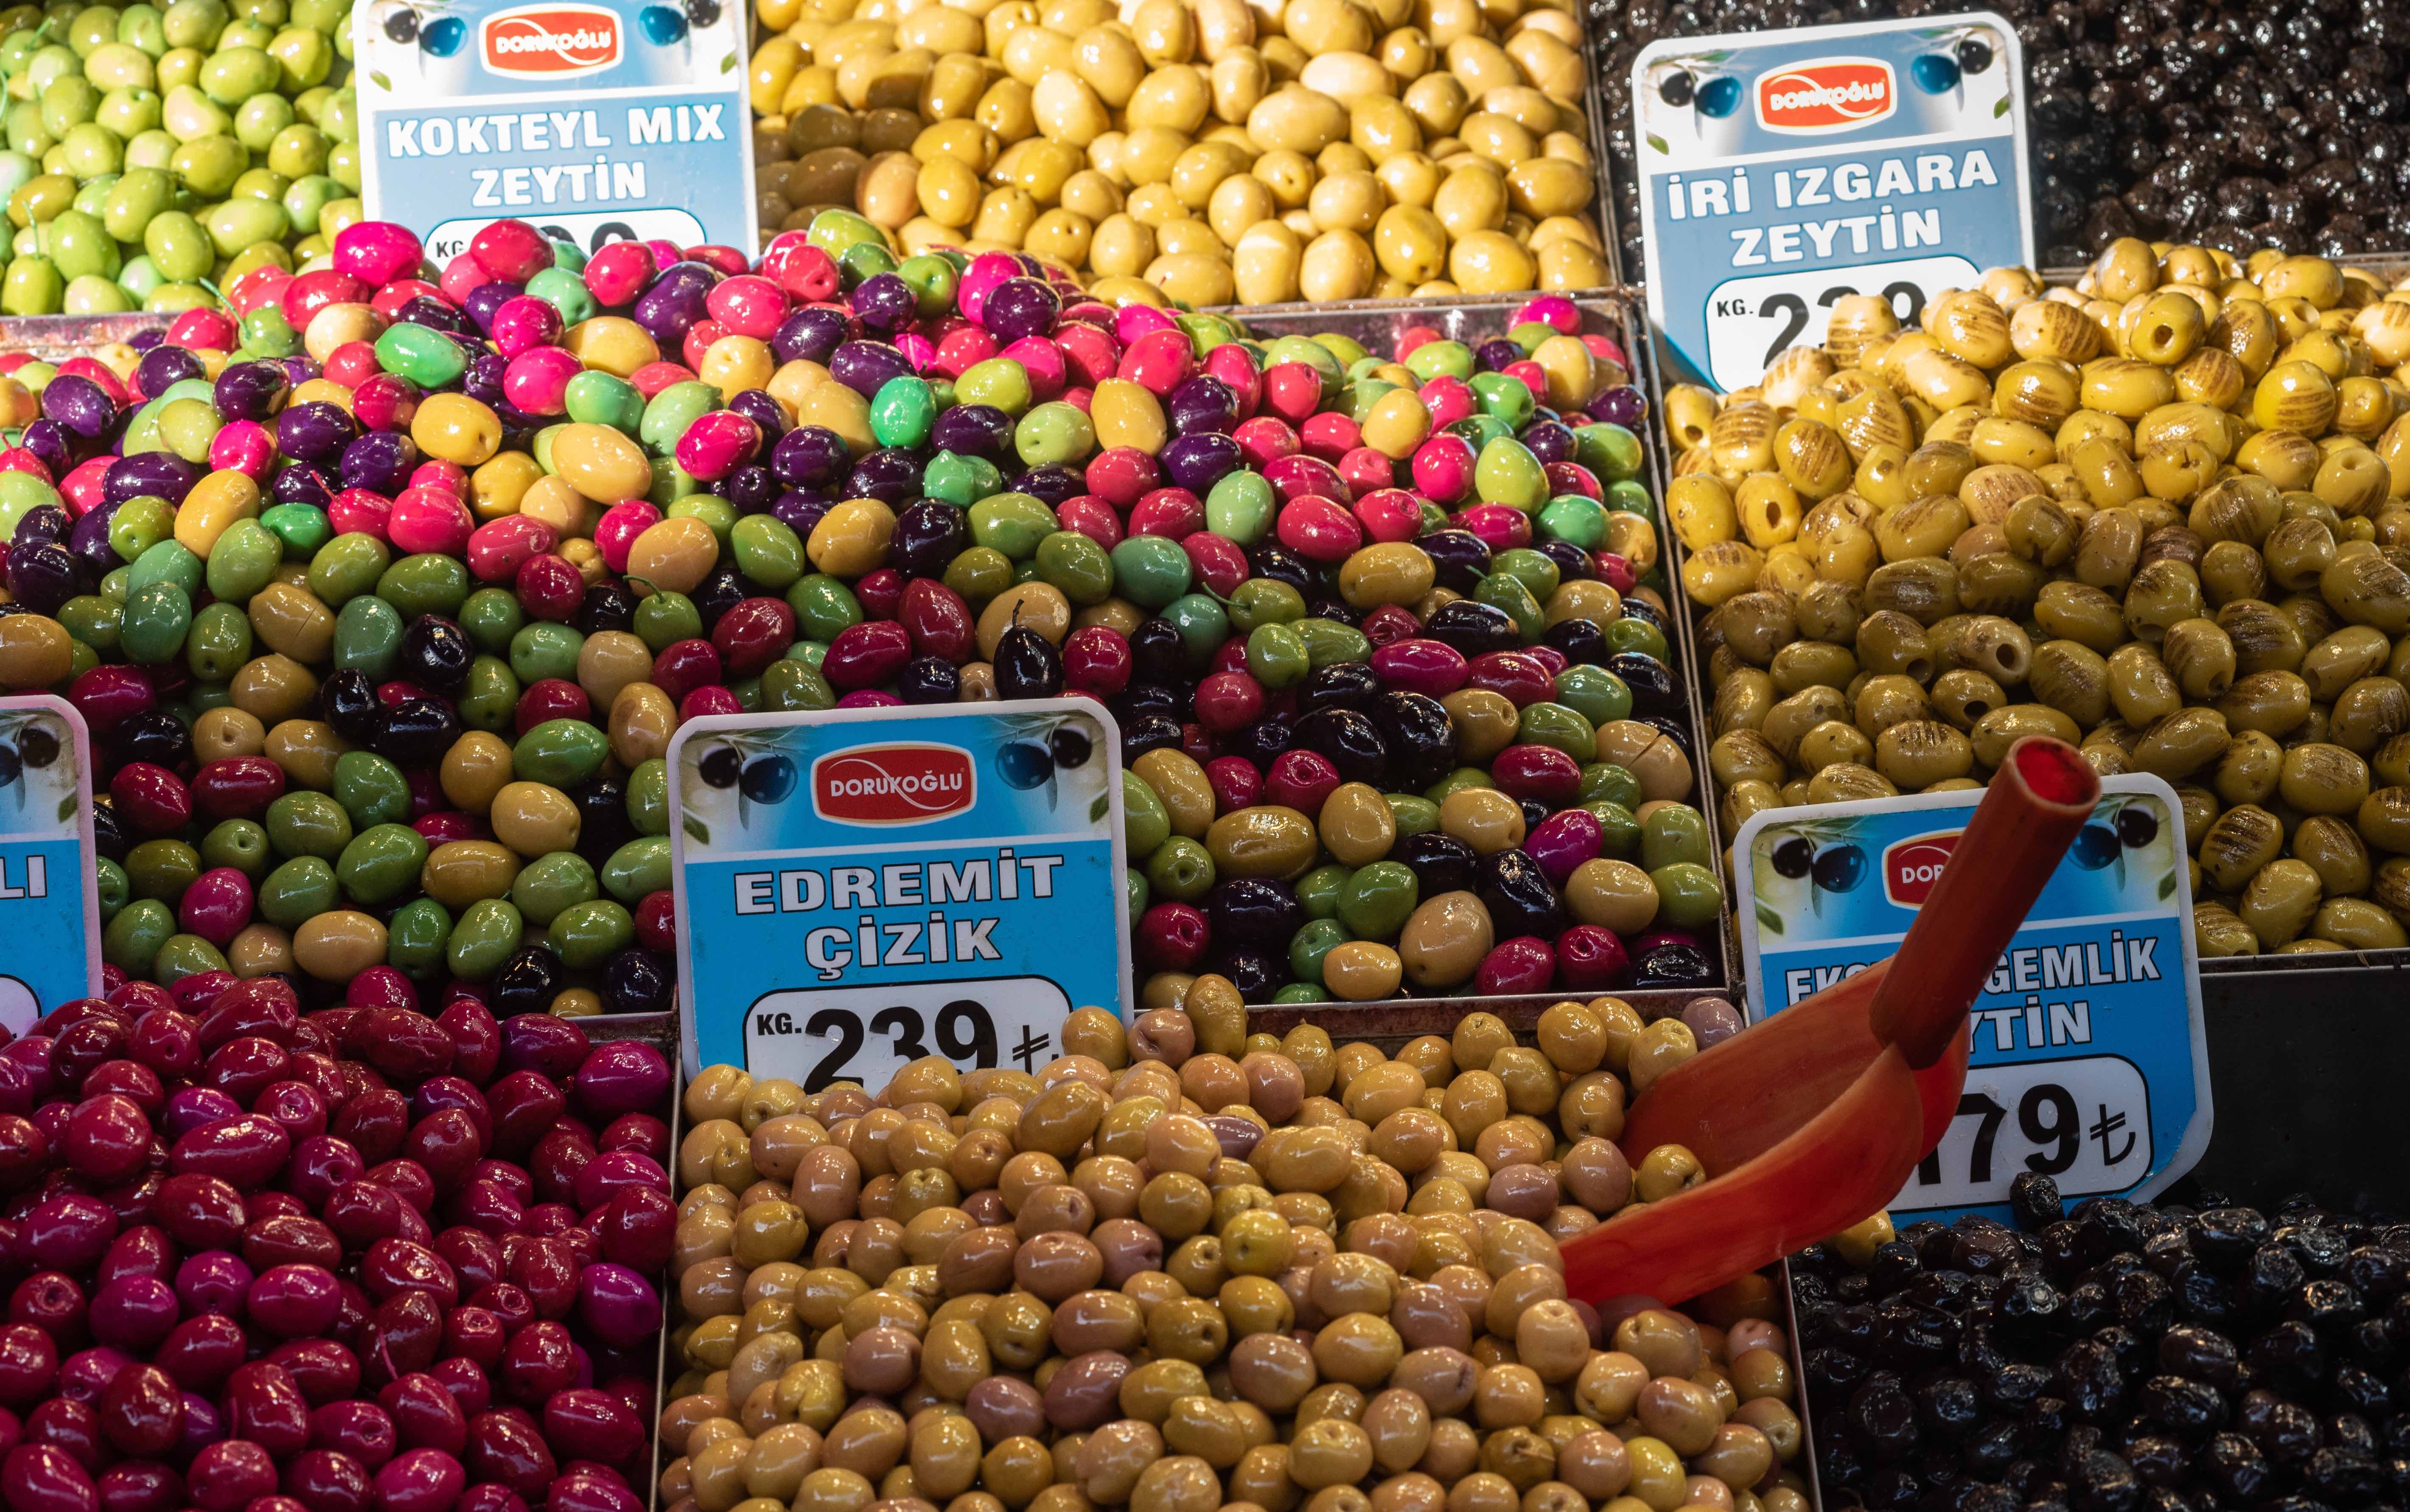 Despite improved global market conditions, high food price inflation persists